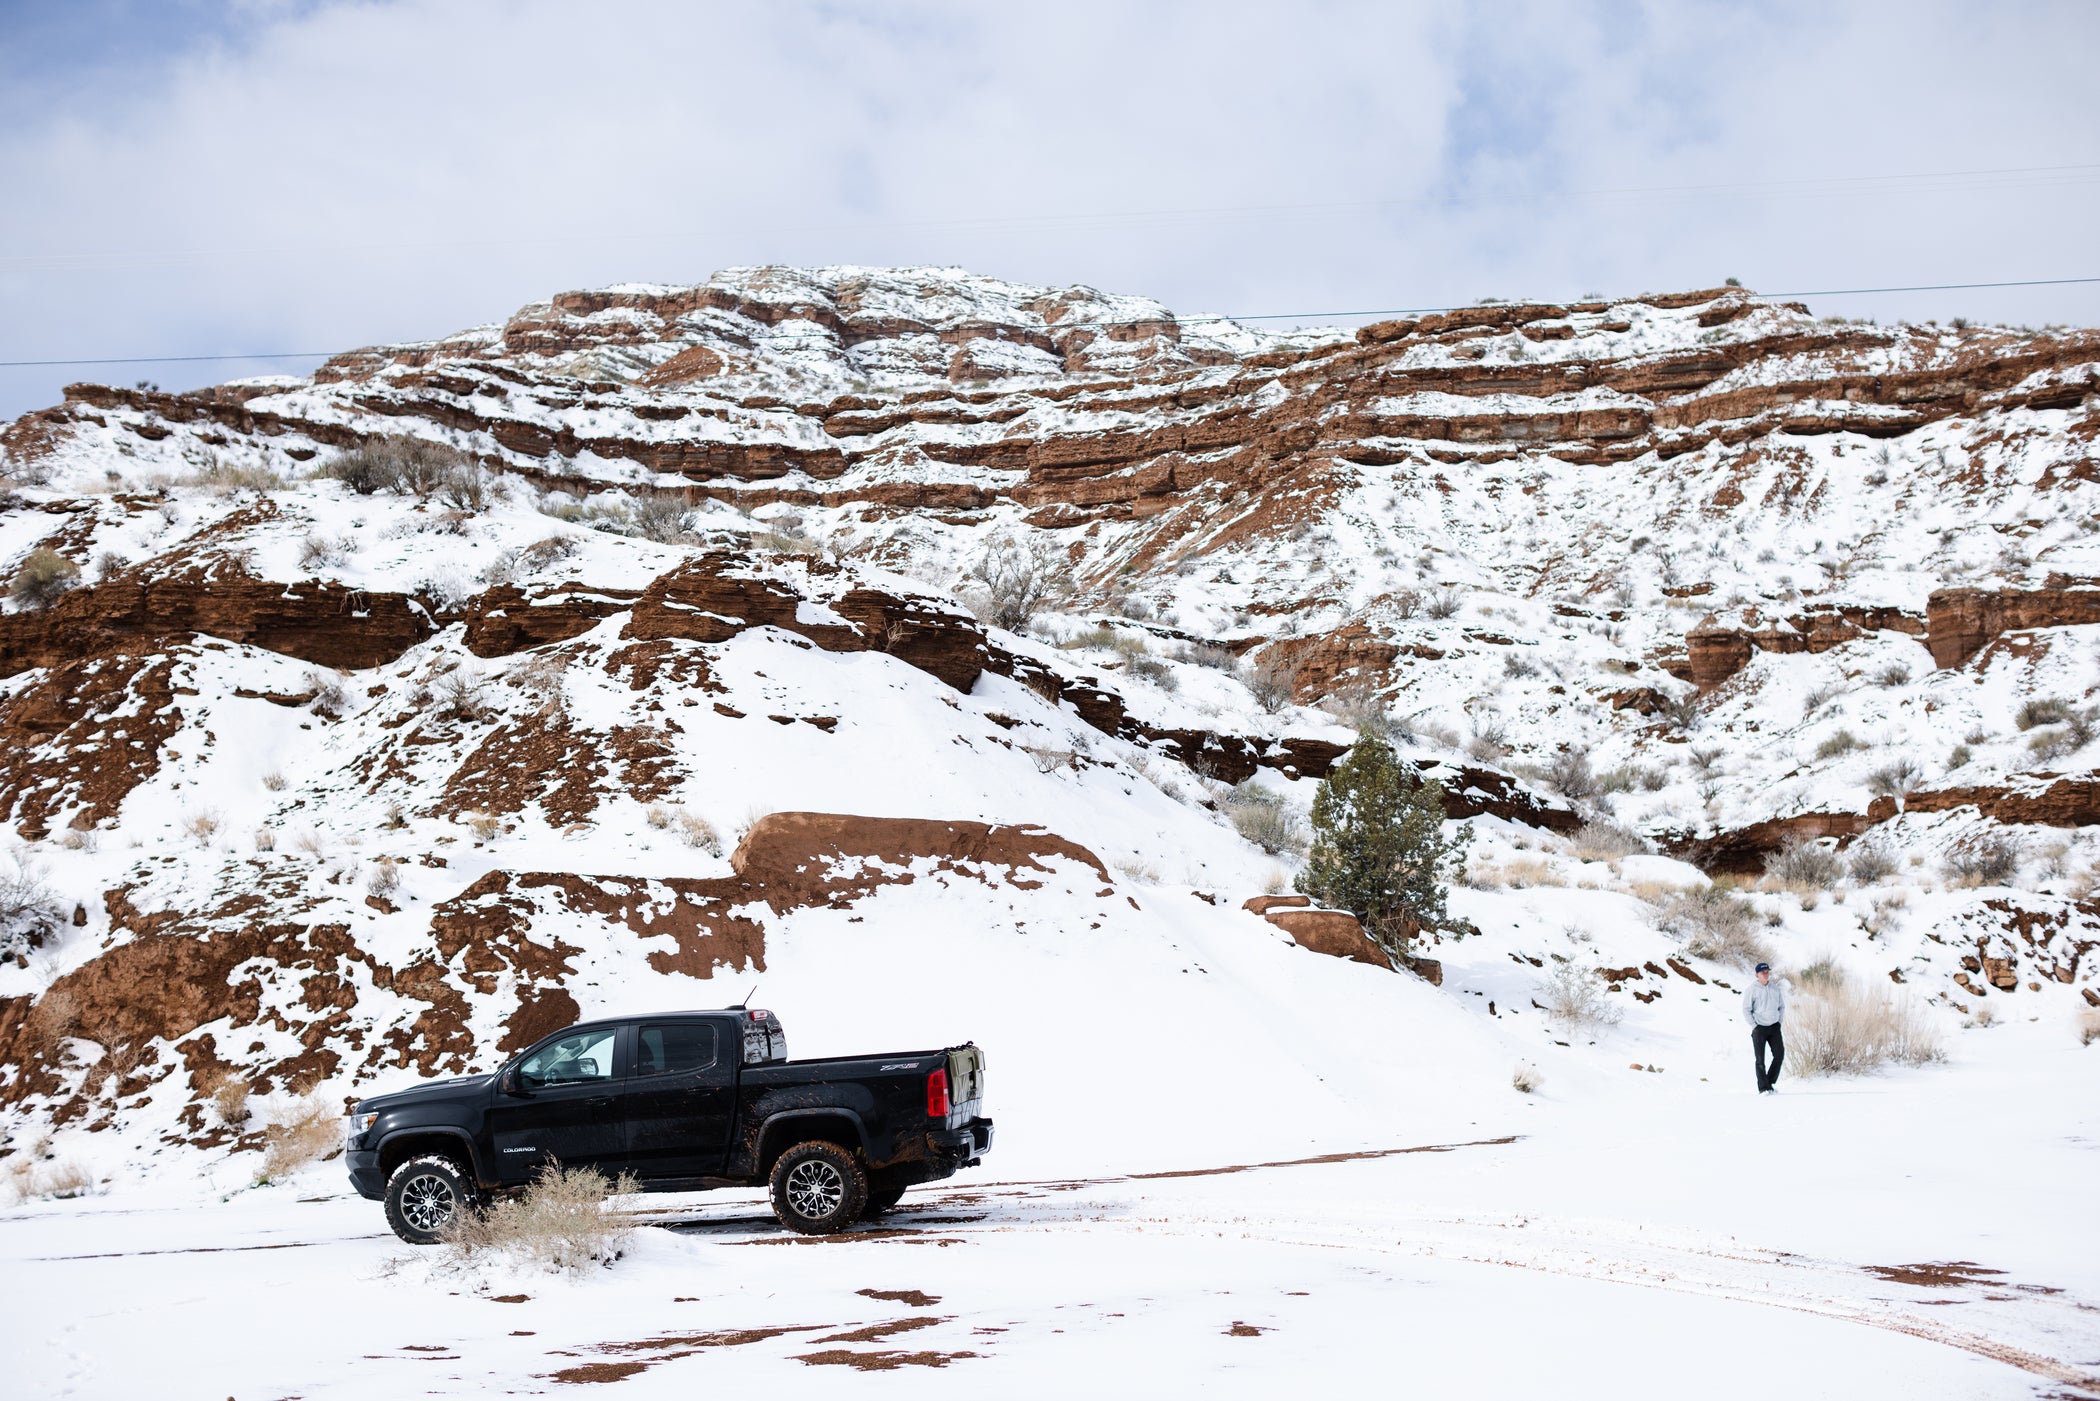 -	Snowed out. Not the common sight we are used to seeing in the UTAH desert. 